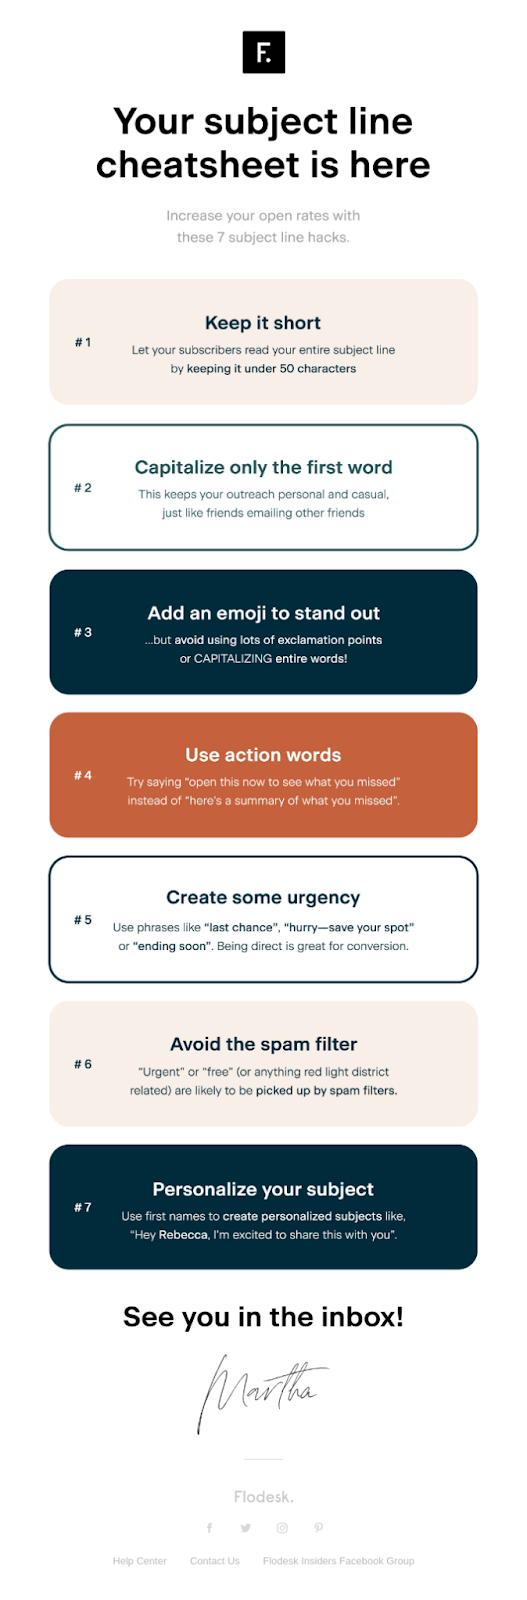 The subject line cheat sheet from Flodesk